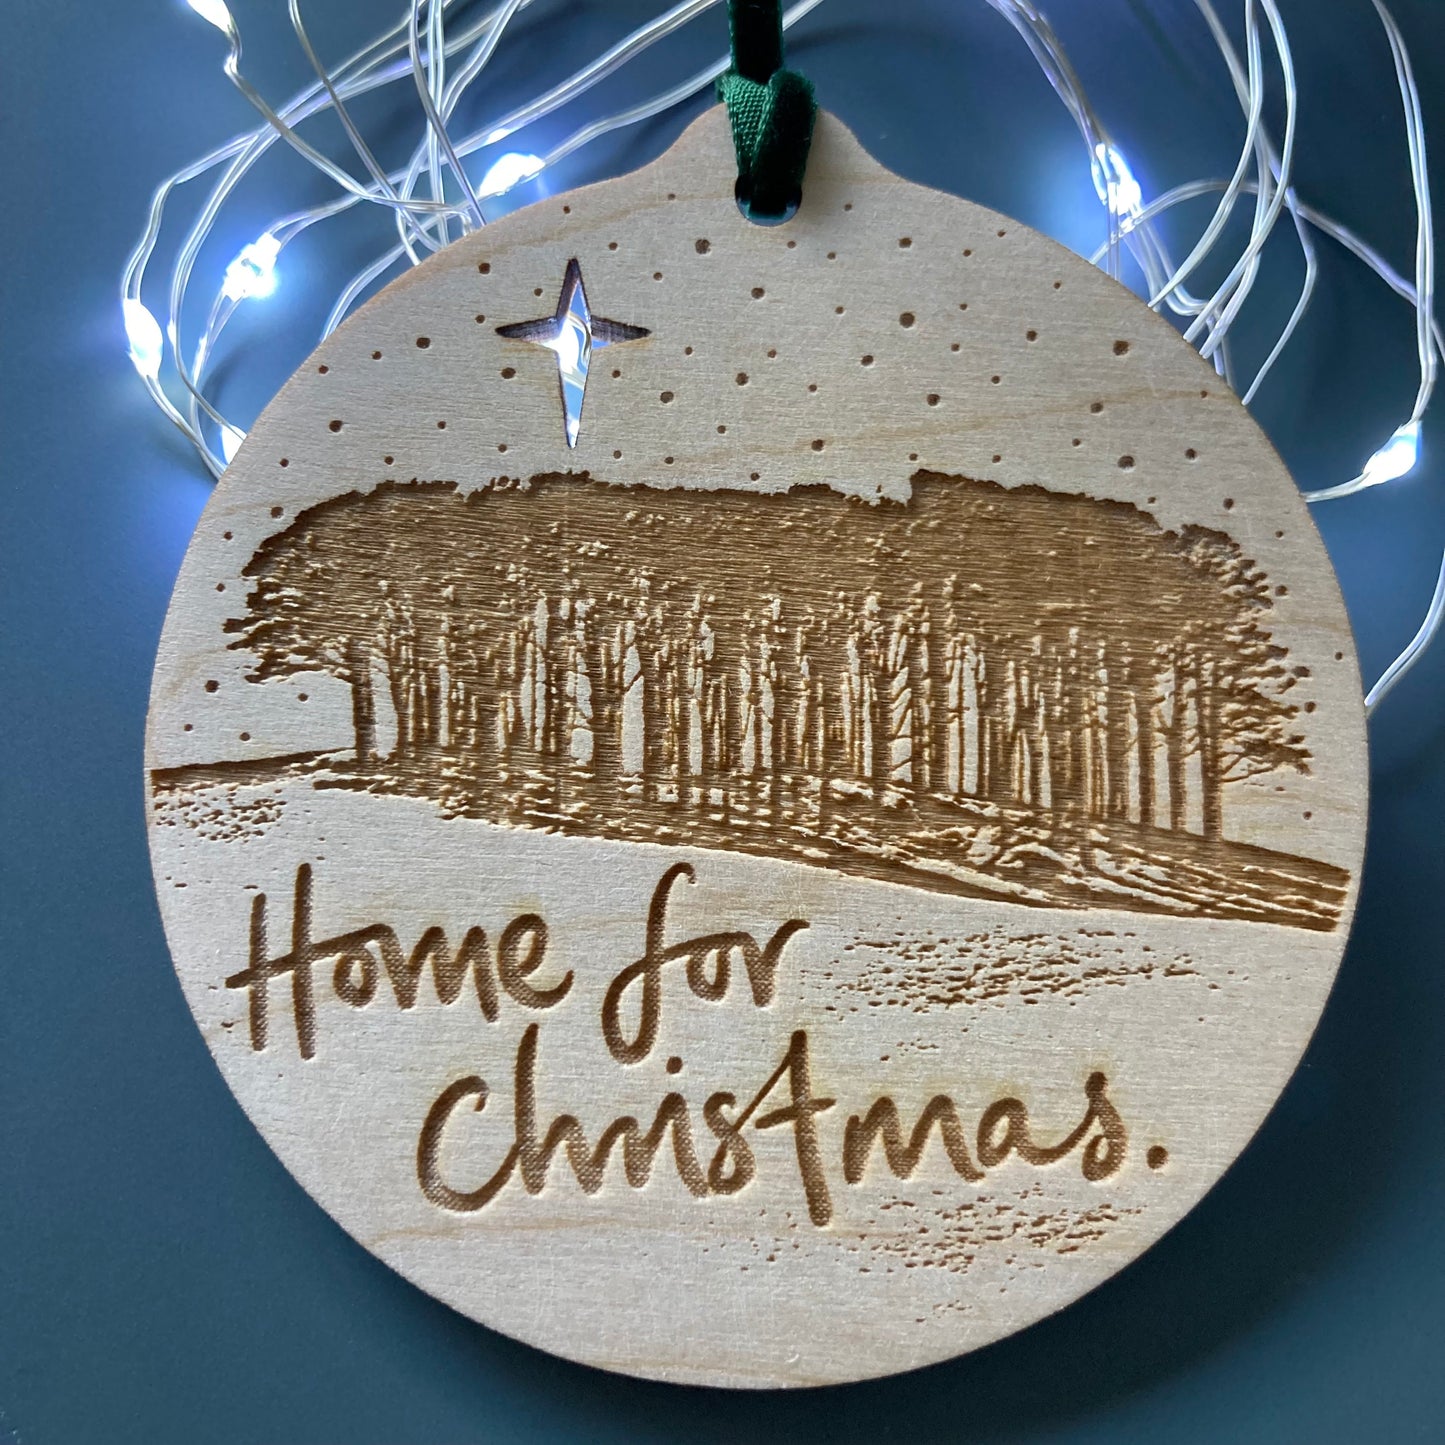 Home for Christmas | 'Nearly home trees' laser etched bauble